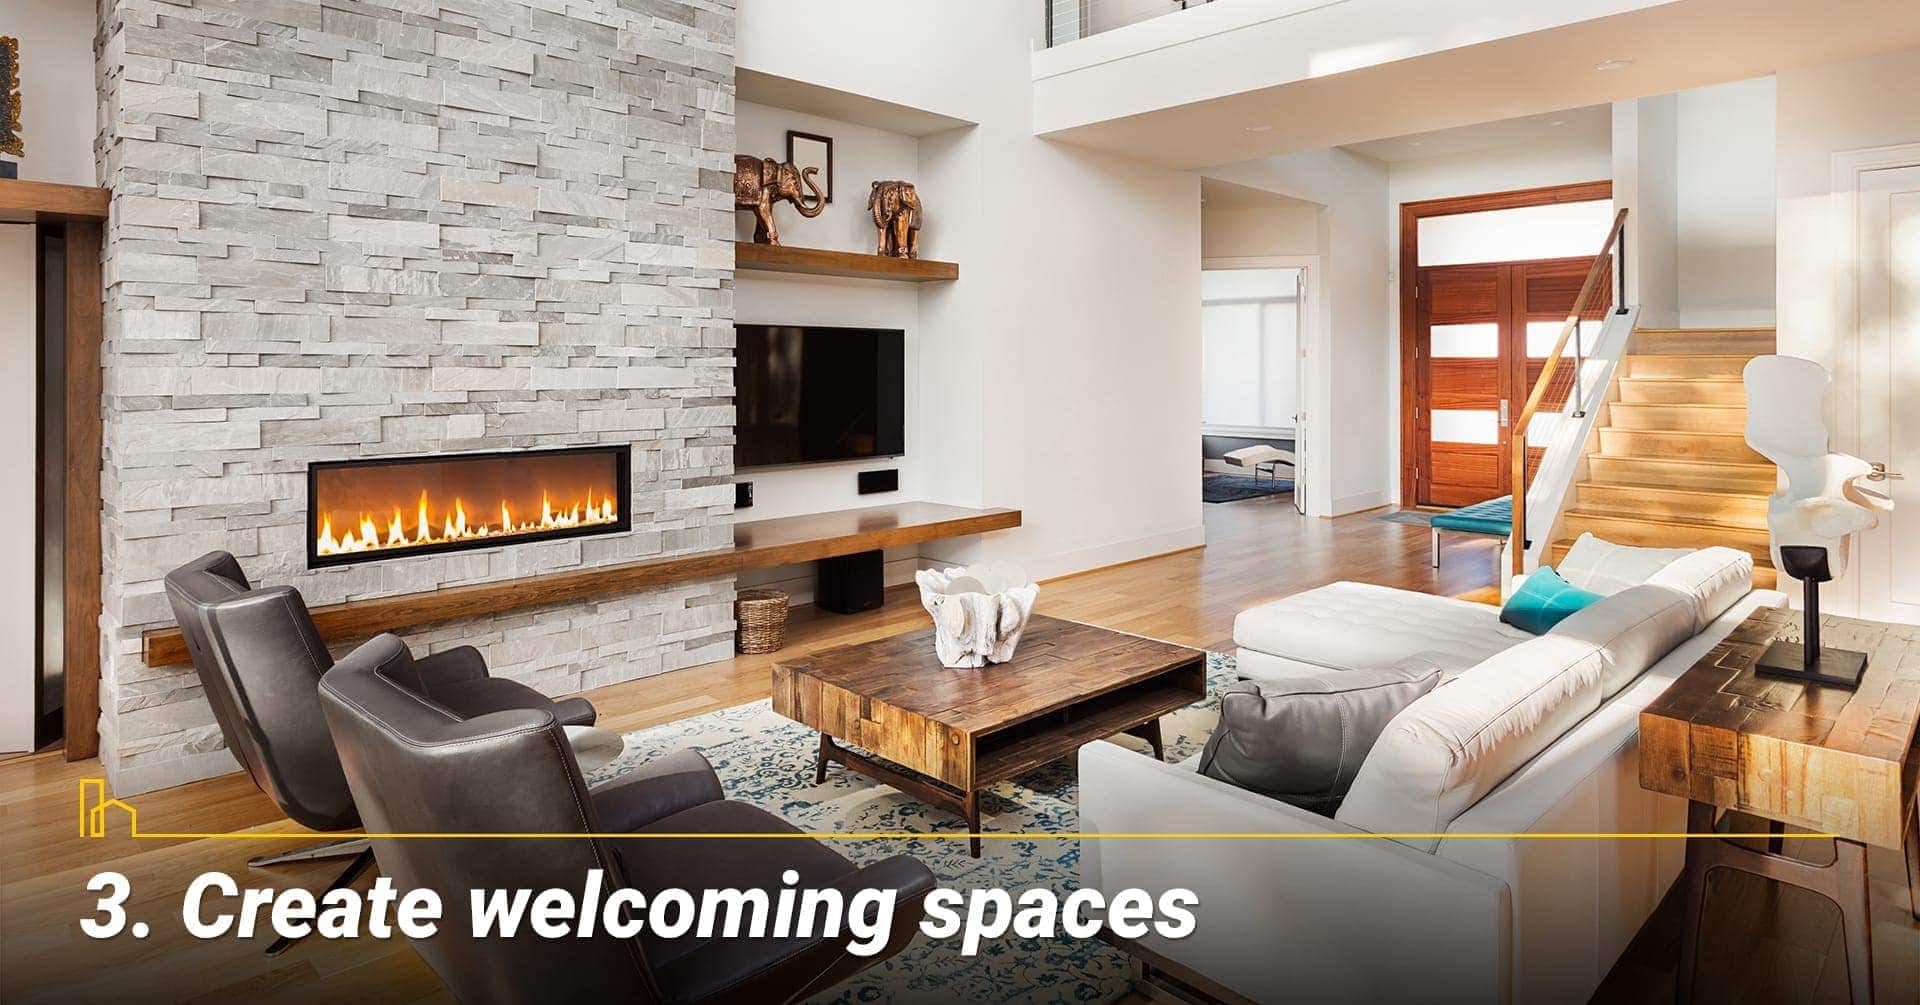 Create welcoming spaces, make your space inviting